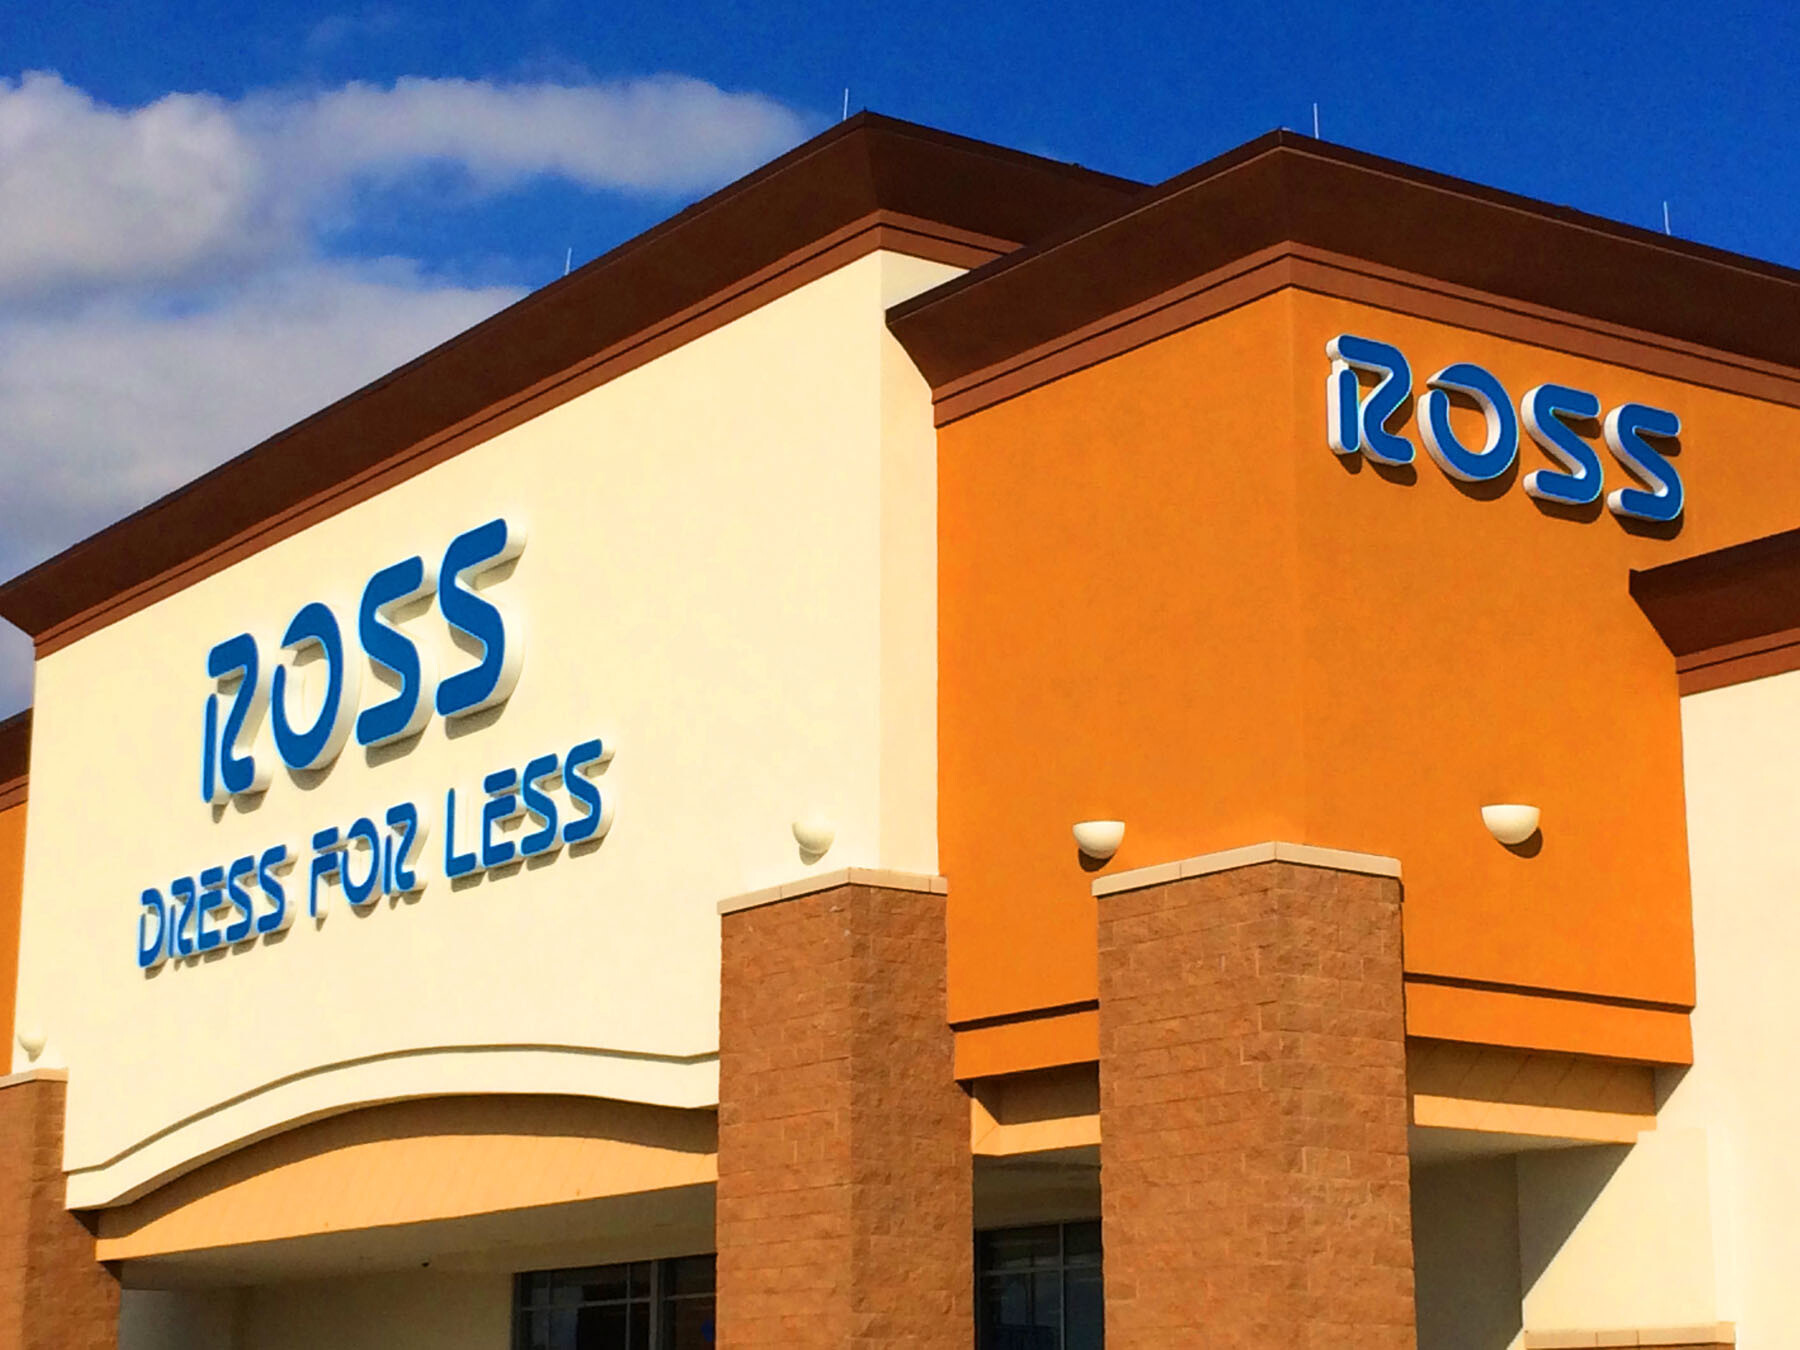 Ross Clothing Store Dress for Less Channel Letters